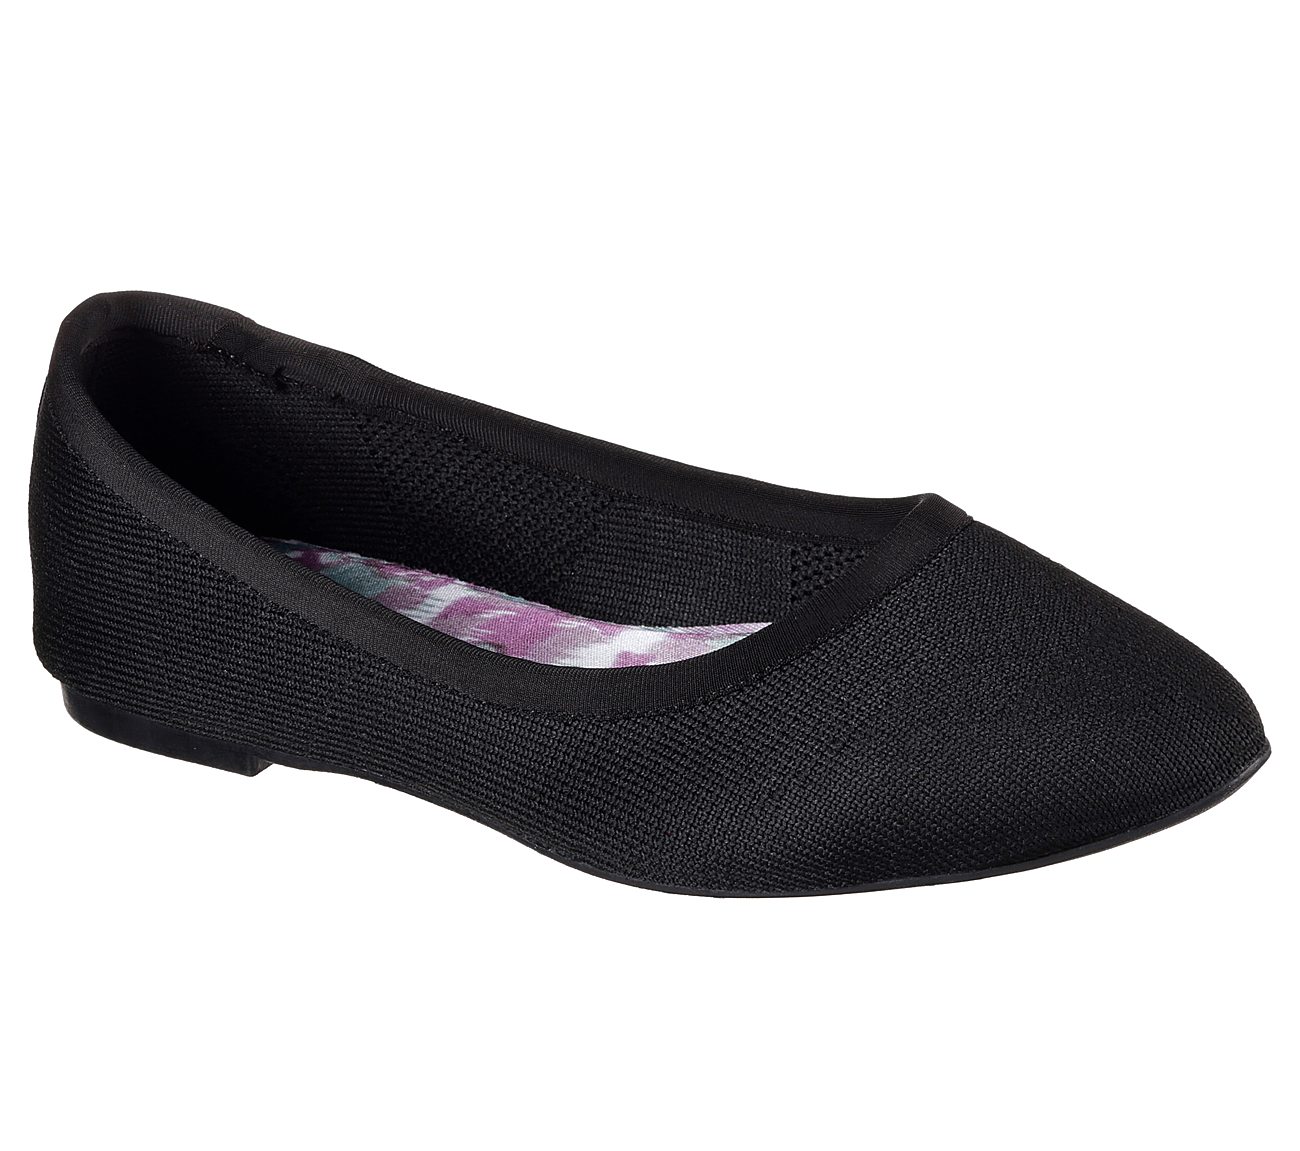 skechers pointed toe flats off 62 